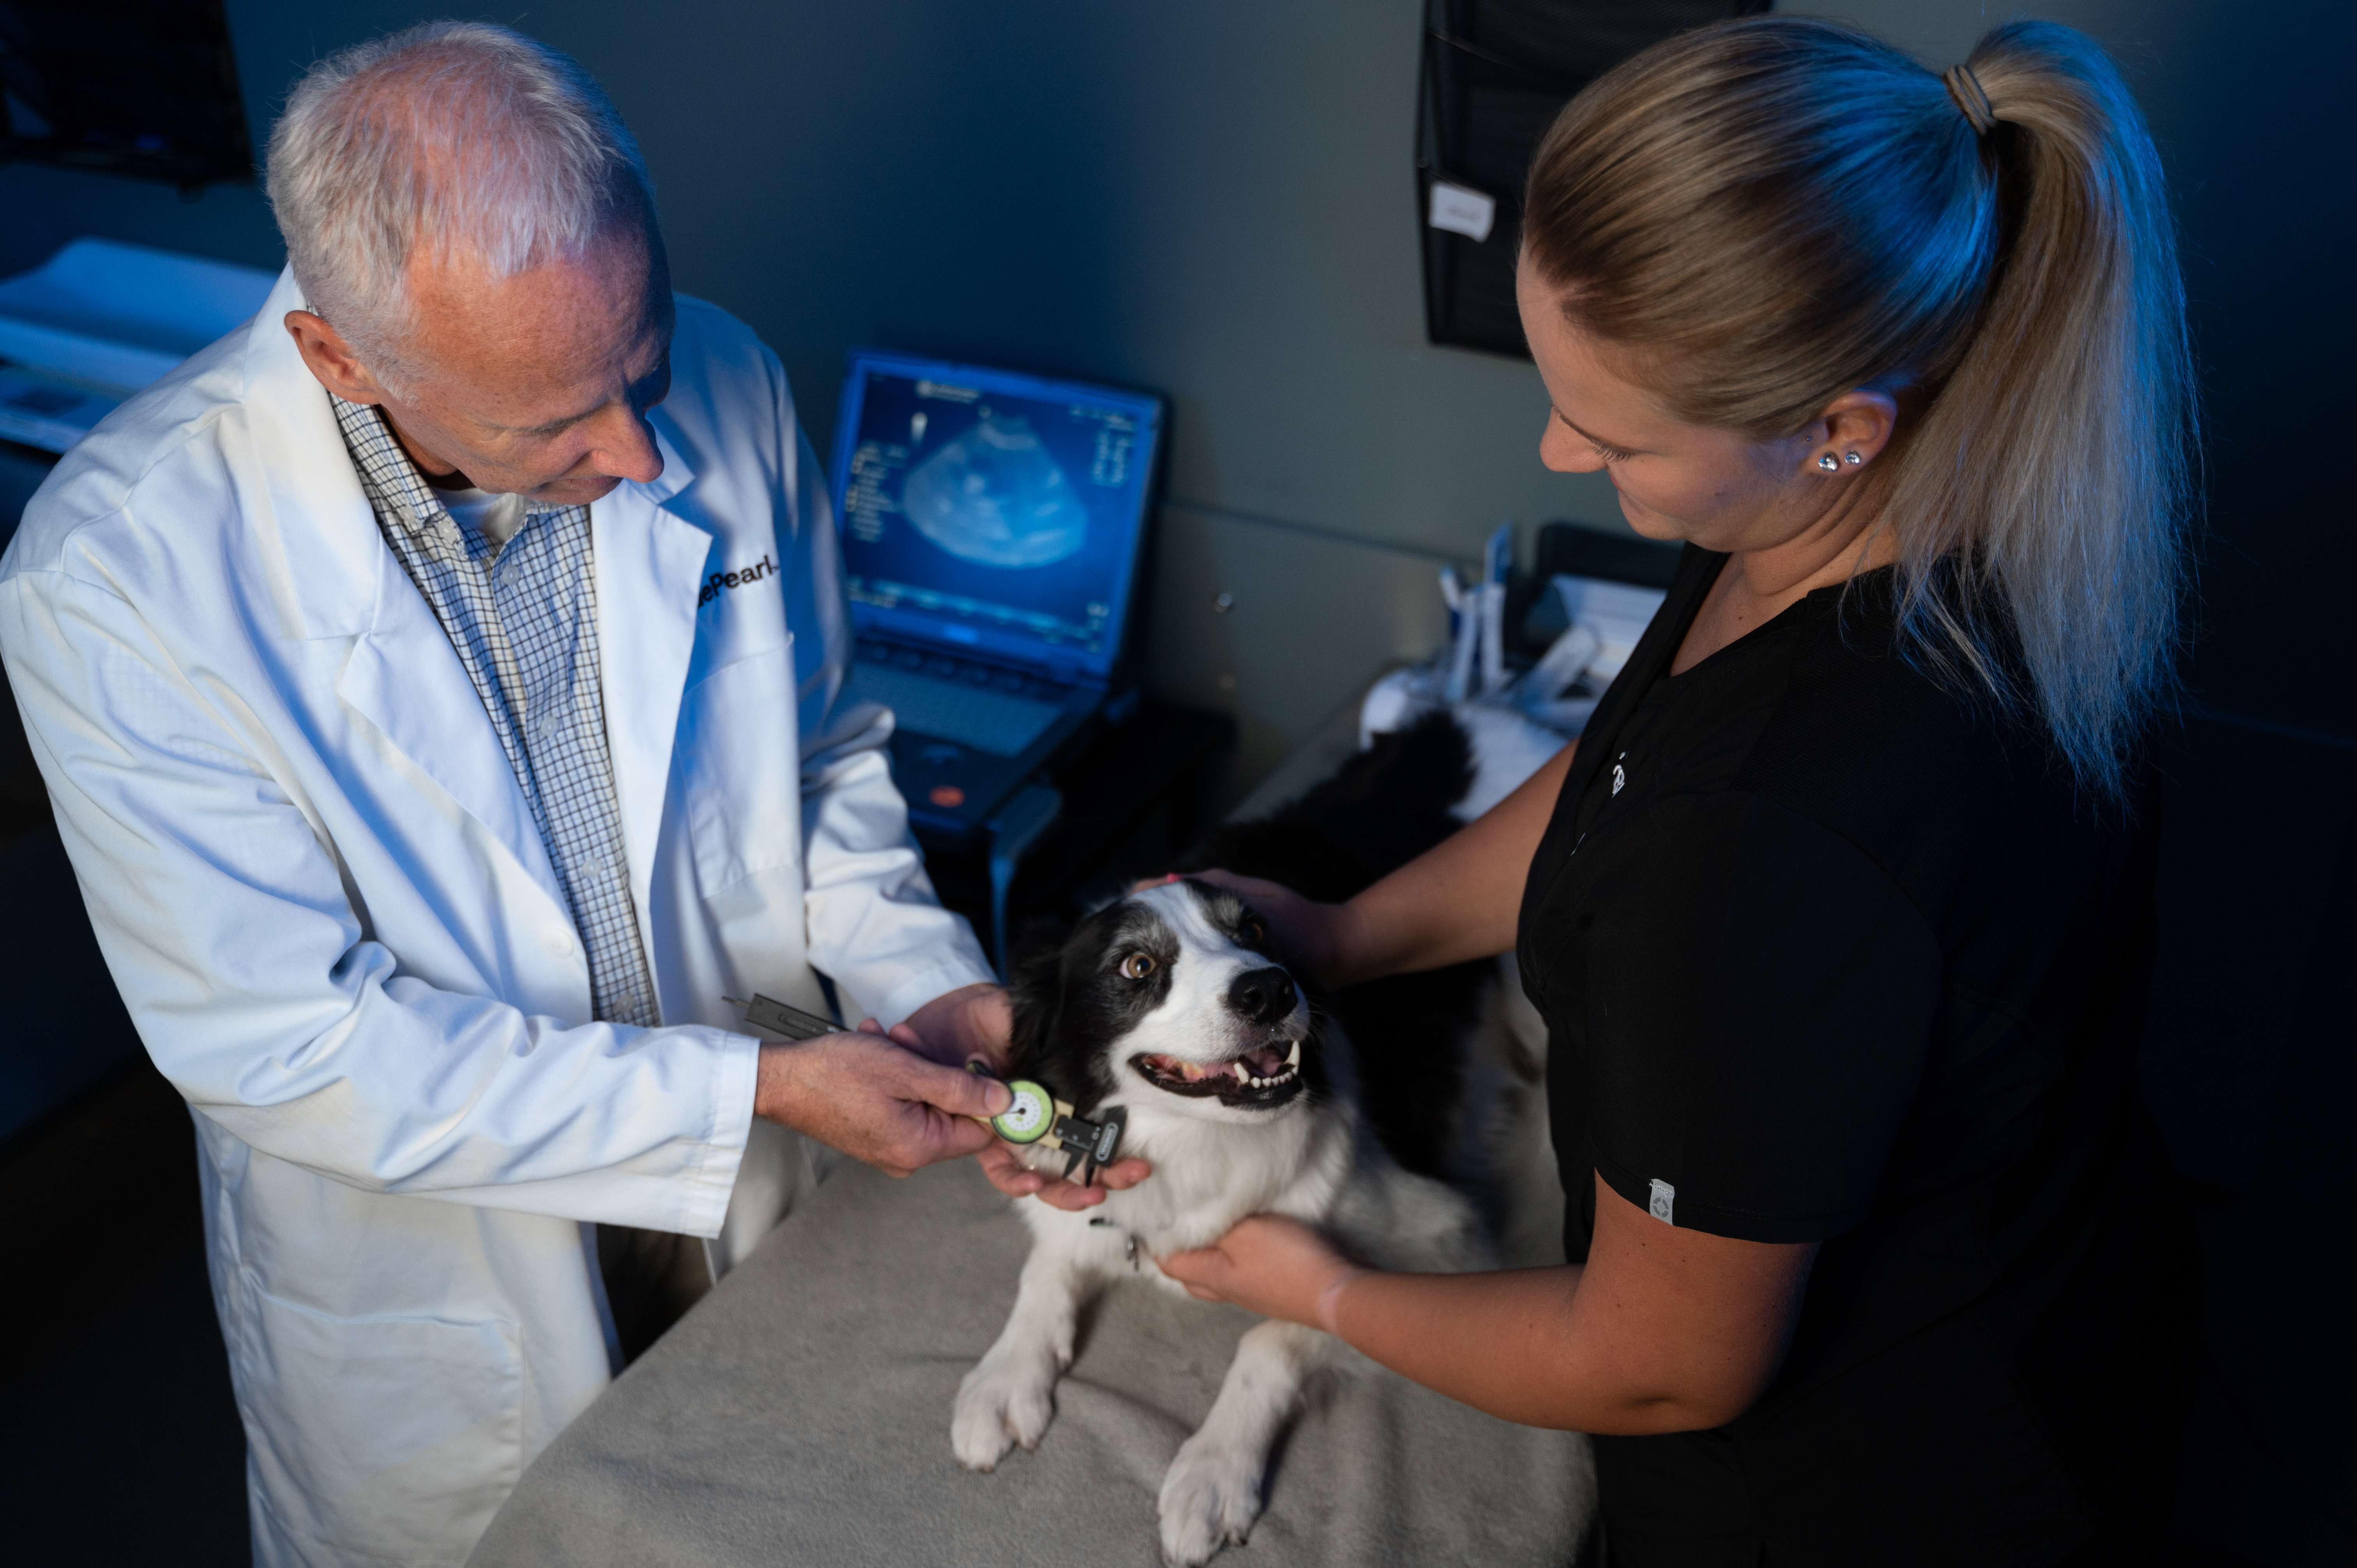 An oncology veterinarian examines a patient while a technician helps.